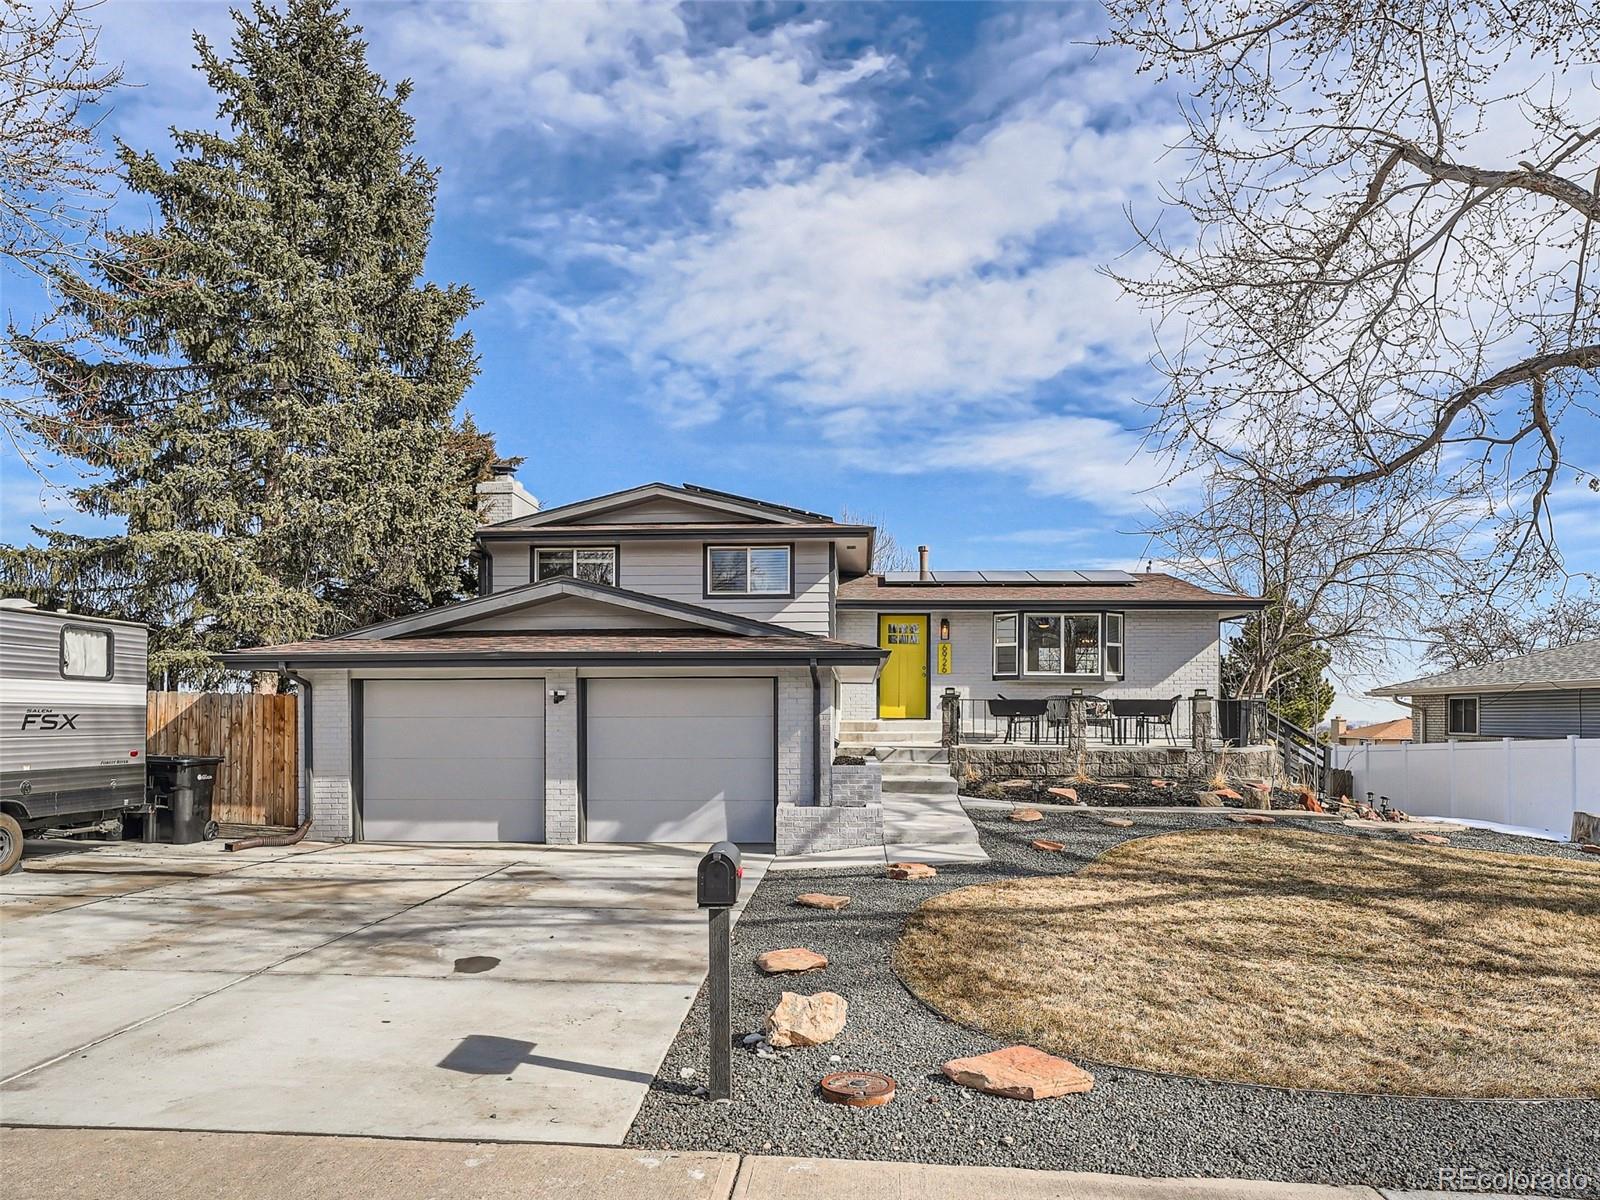 6926  quay court, Arvada sold home. Closed on 2024-03-26 for $685,000.